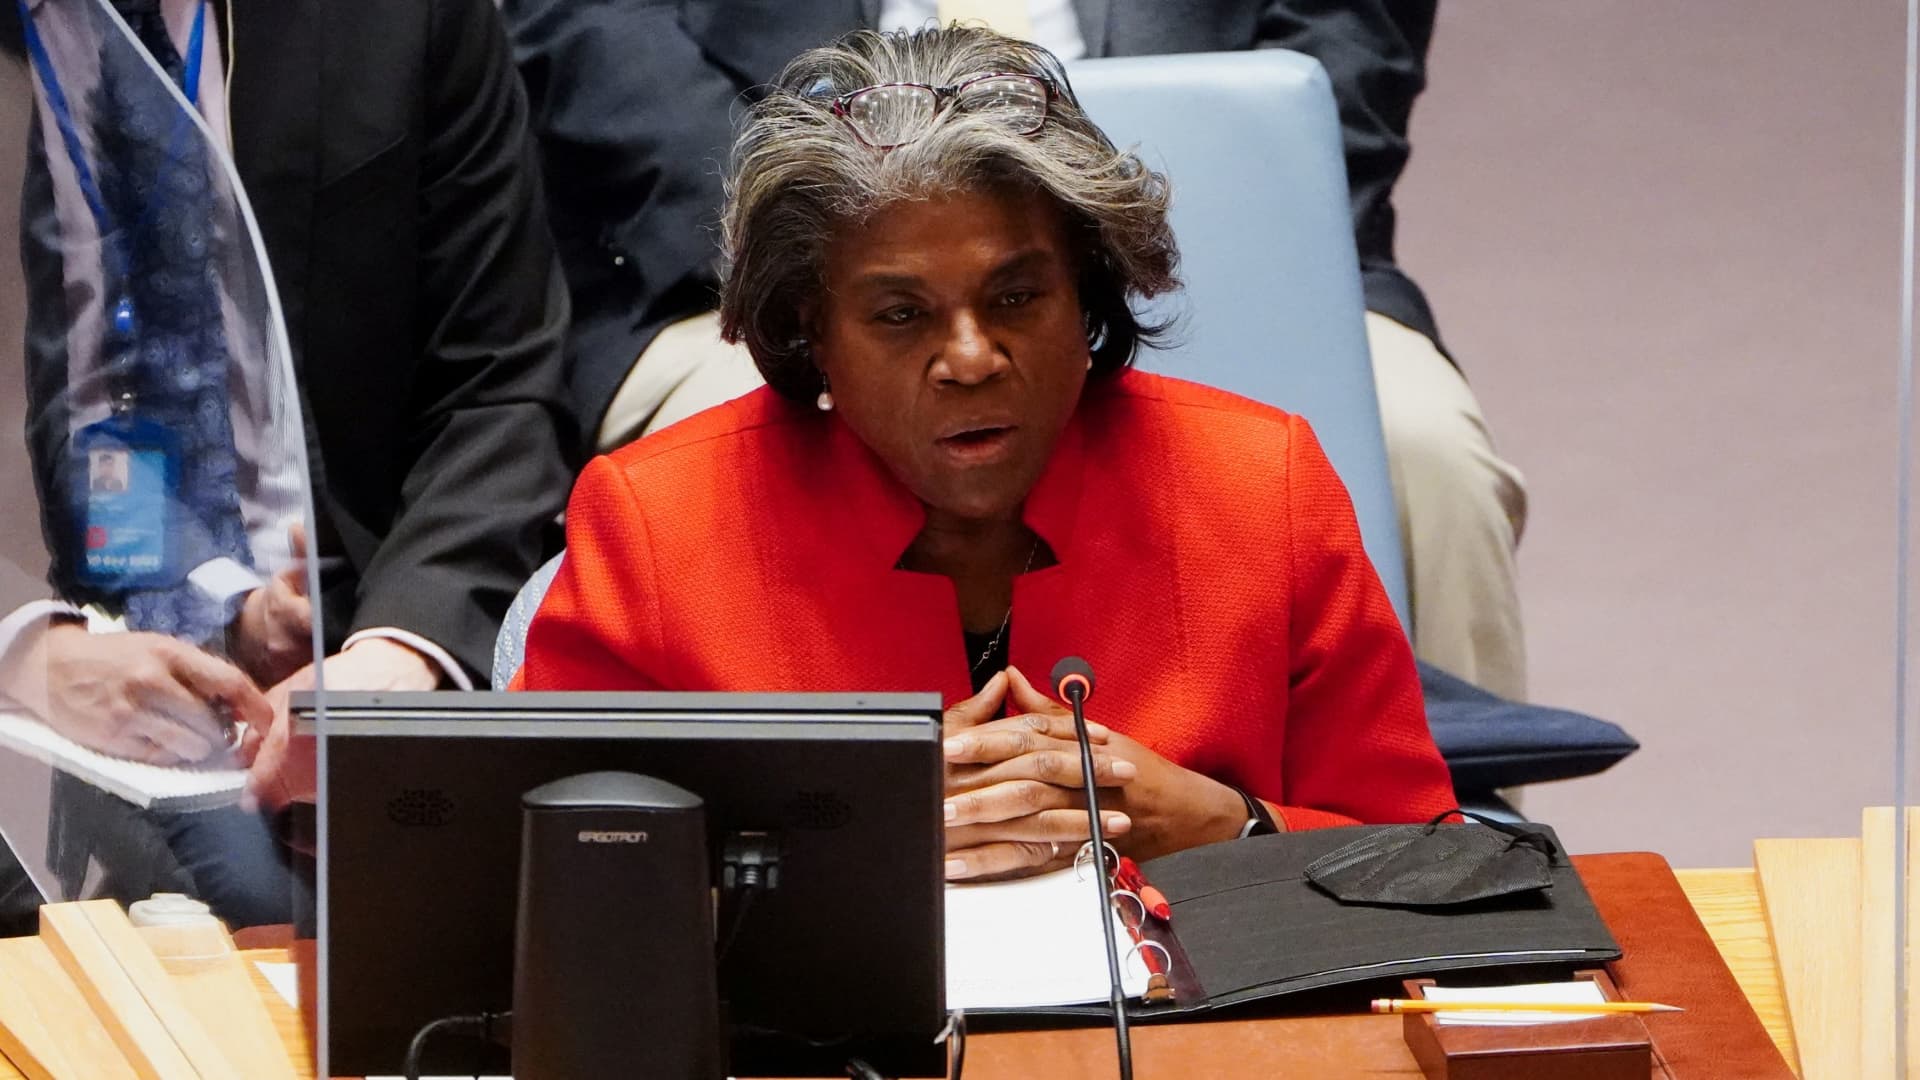 U.S. Ambassador to the U.N. Linda Thomas-Greenfield speaks during an emergency meeting of the United Nations Security Council after Russia's invasion of Ukraine, in New York City, U.S., March 4, 2022.